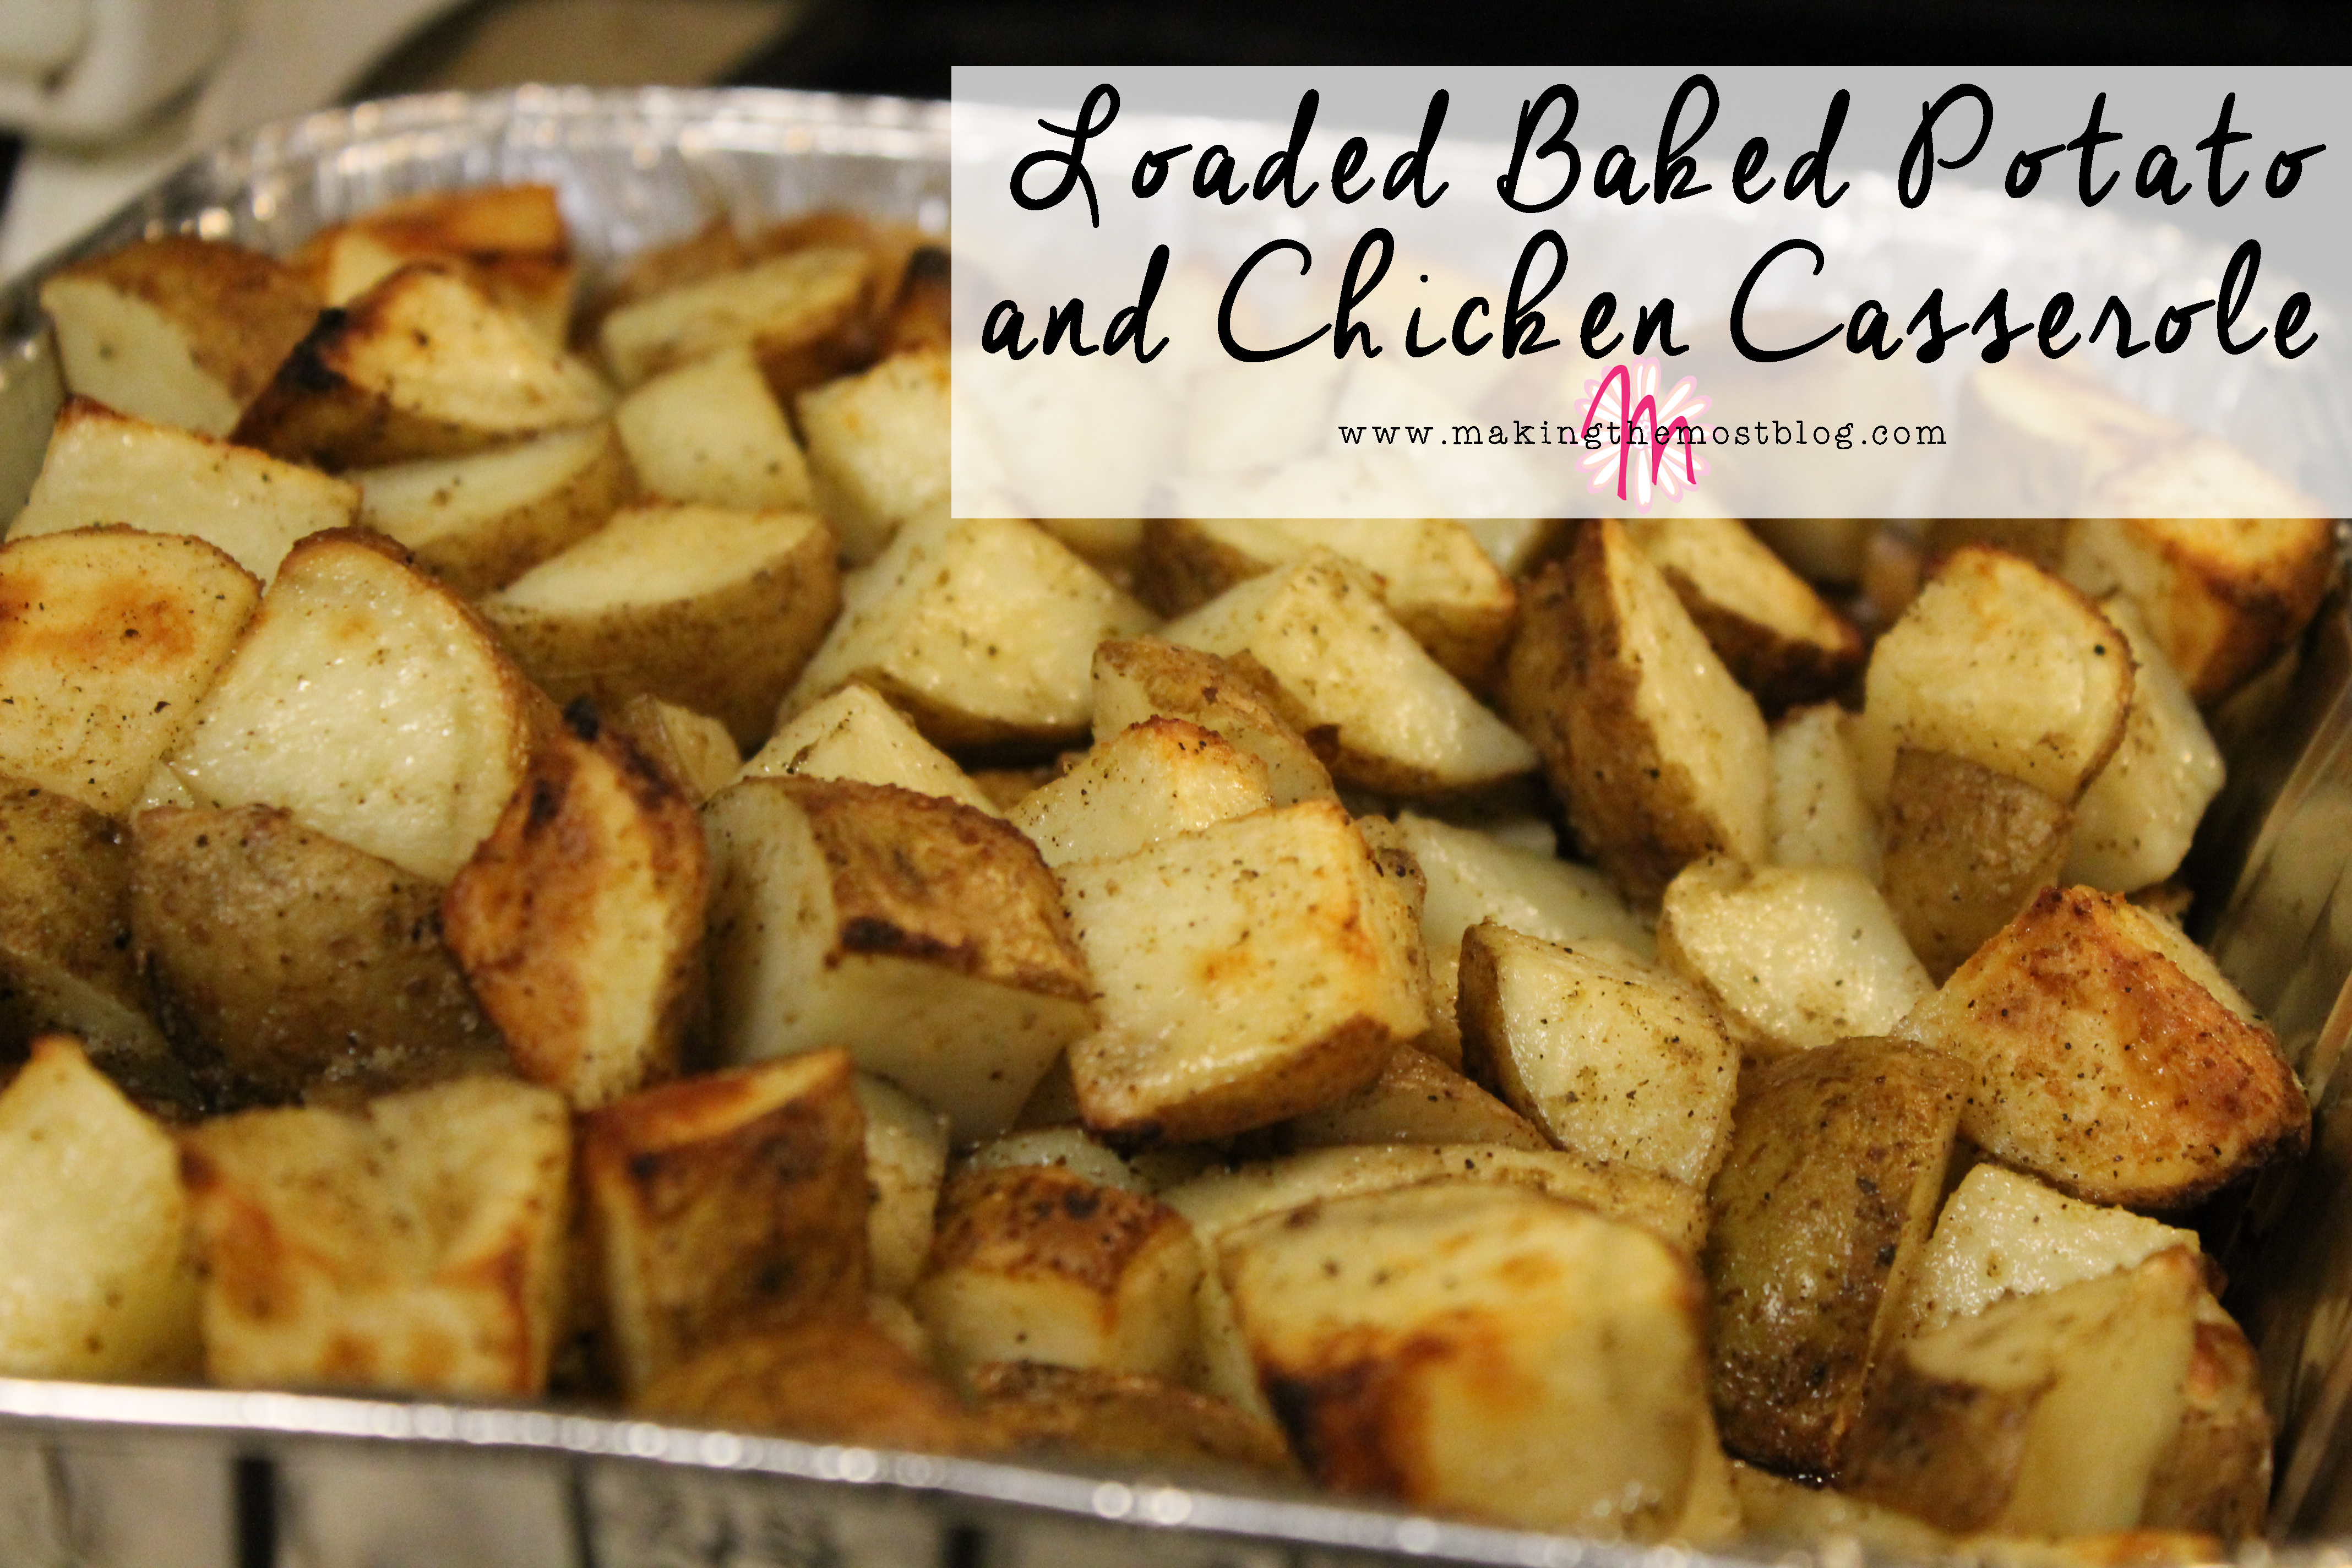 Loaded Baked Potato and Chicken Casserole | Making the Most Blog